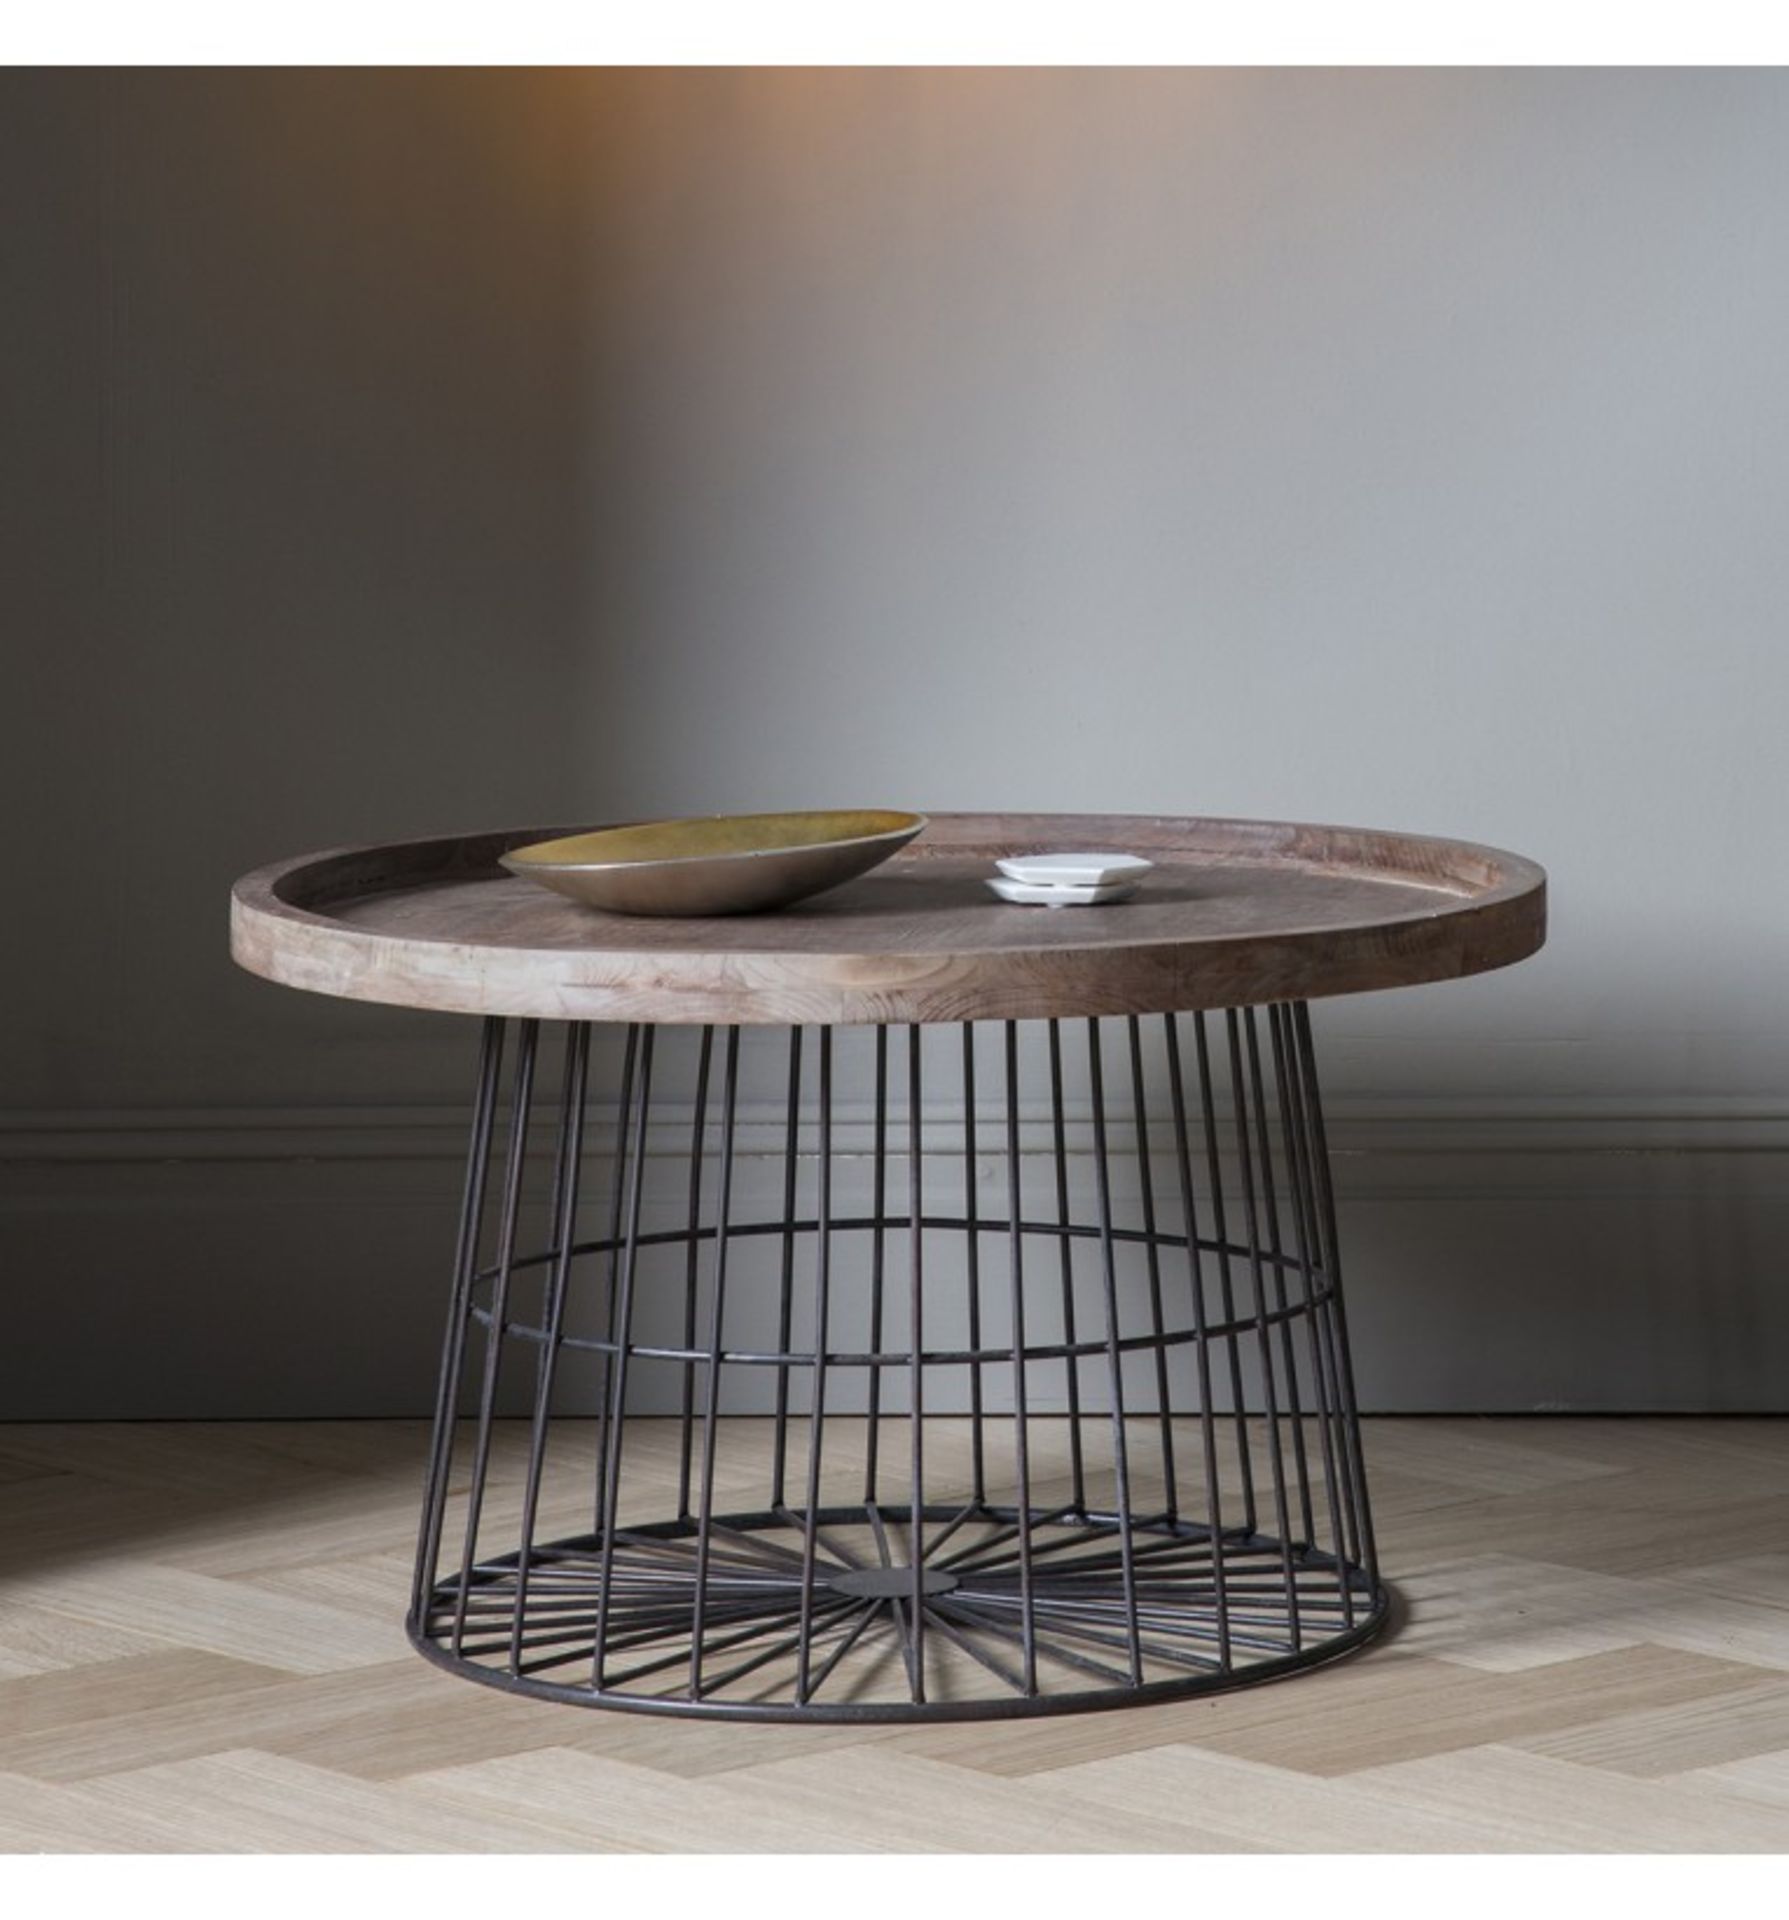 Menzies Coffee Table The Menzies Coffee Table Features A Caged Gun-Metal Frame And Base With A